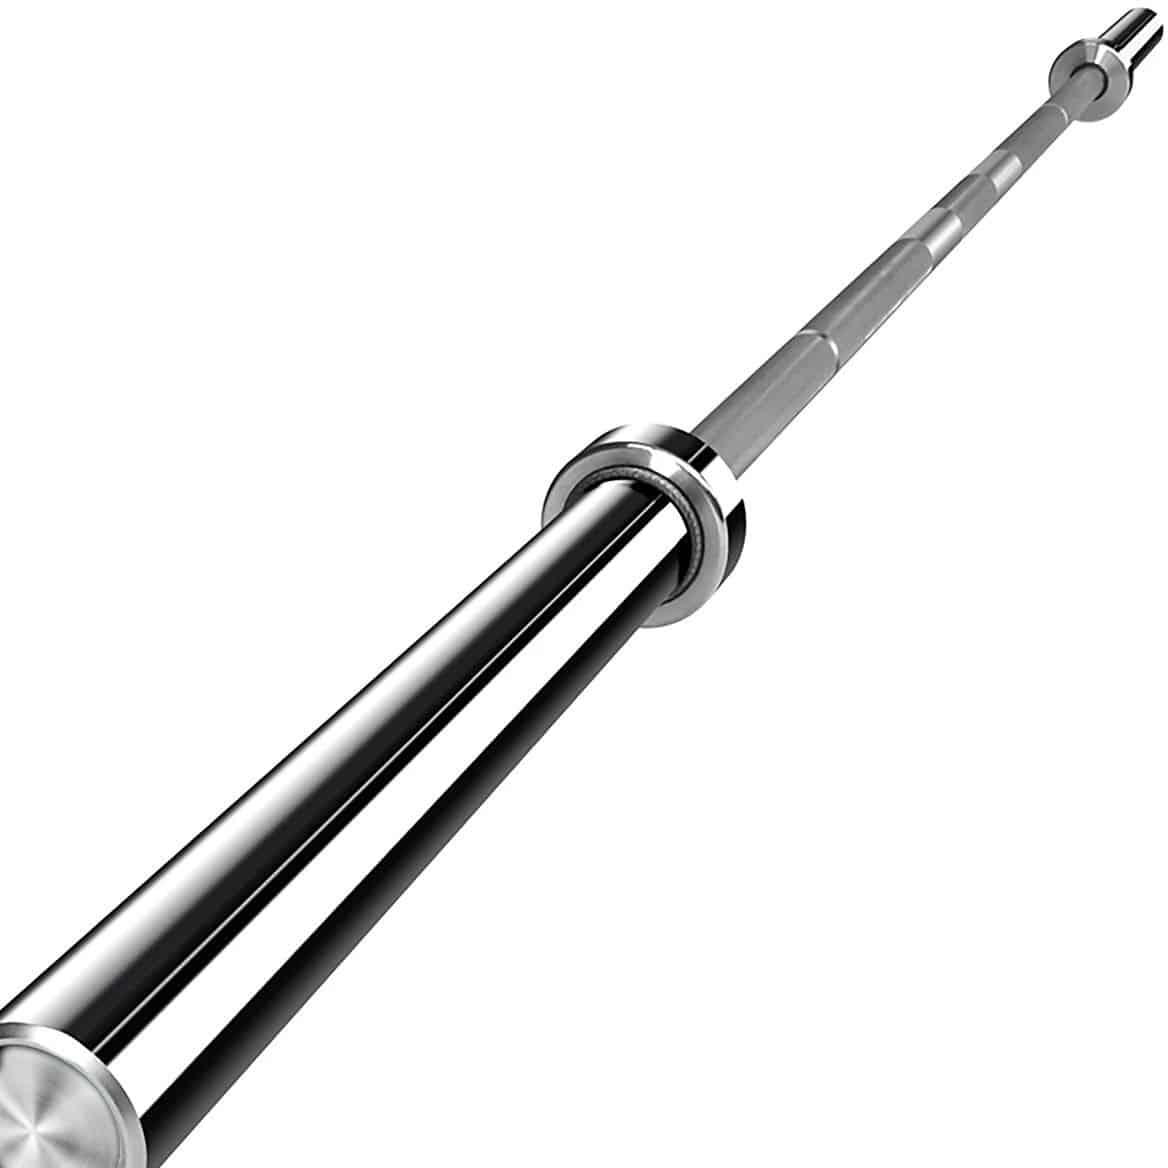 American Barbell 20KG Hard Chrome Gym Bar with Stainless Sleeves - Blemished main